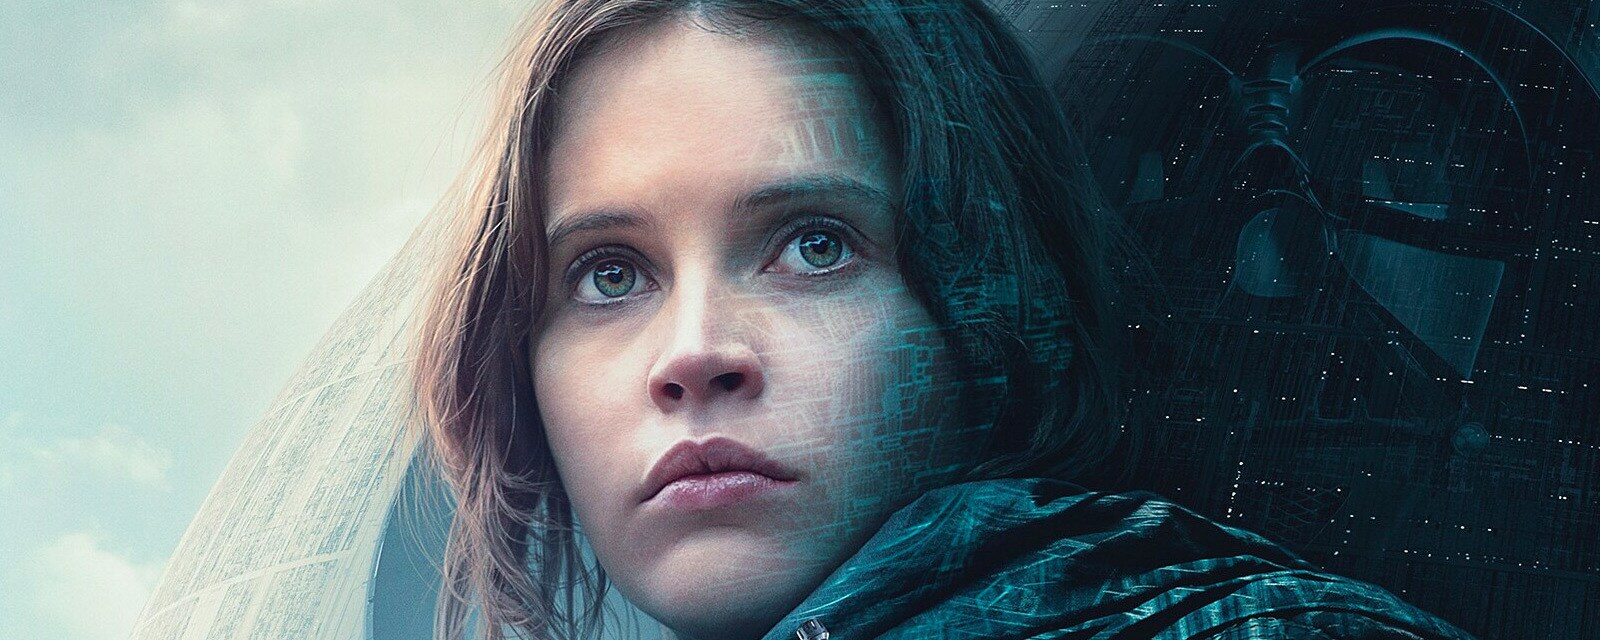 Rogue One: A Star Wars Story Poster Revealed and Trailer Announced on ...